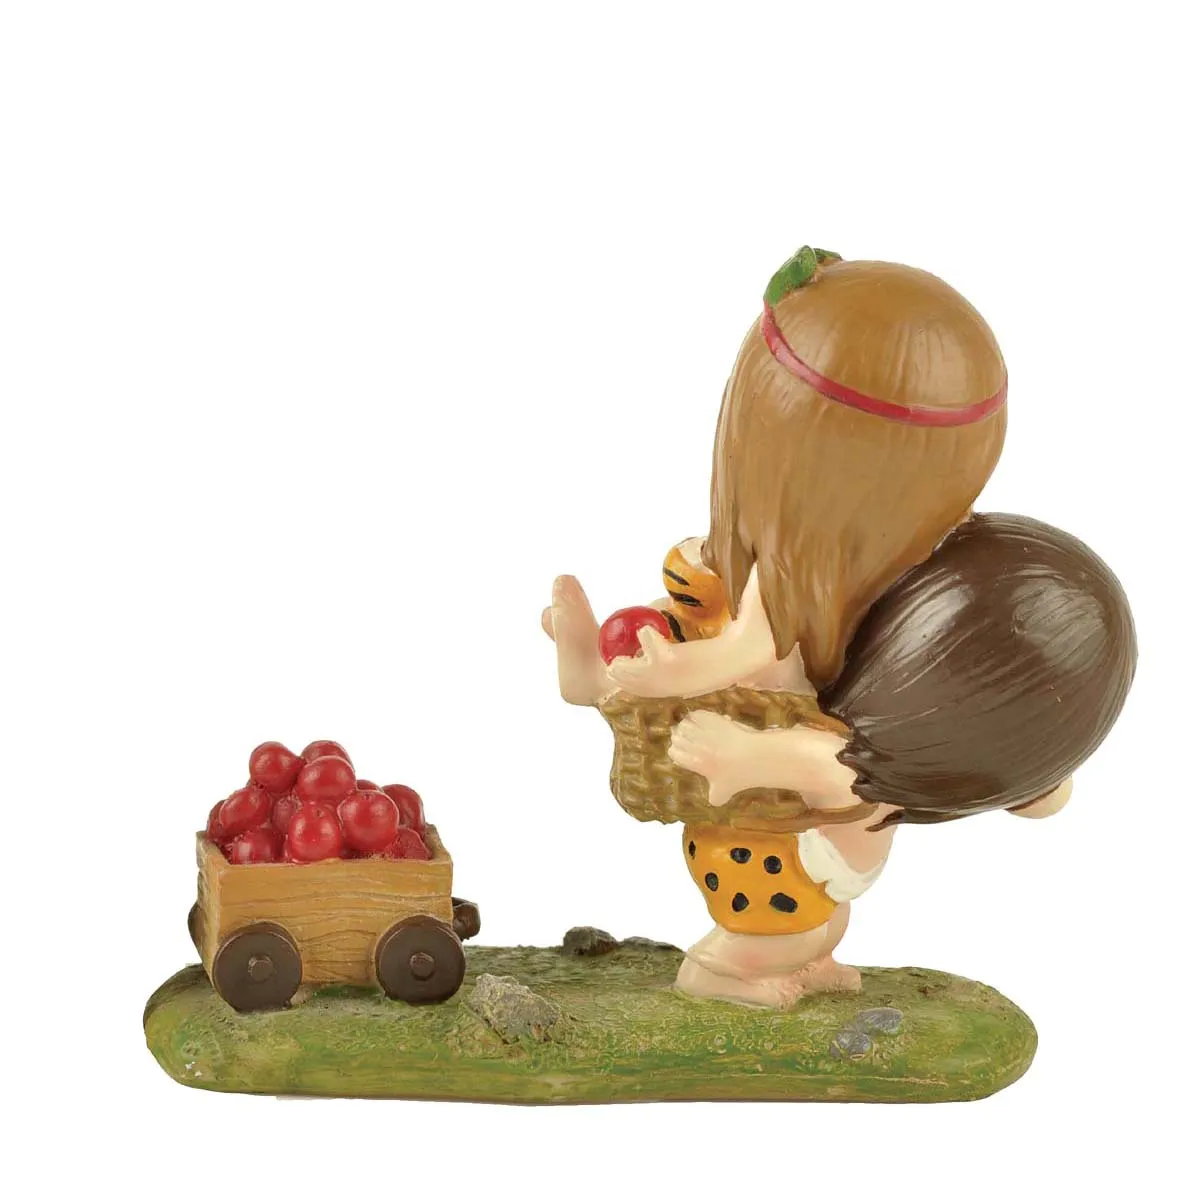 Best quality resin girl and boy figurines decoration for valentines day gifts